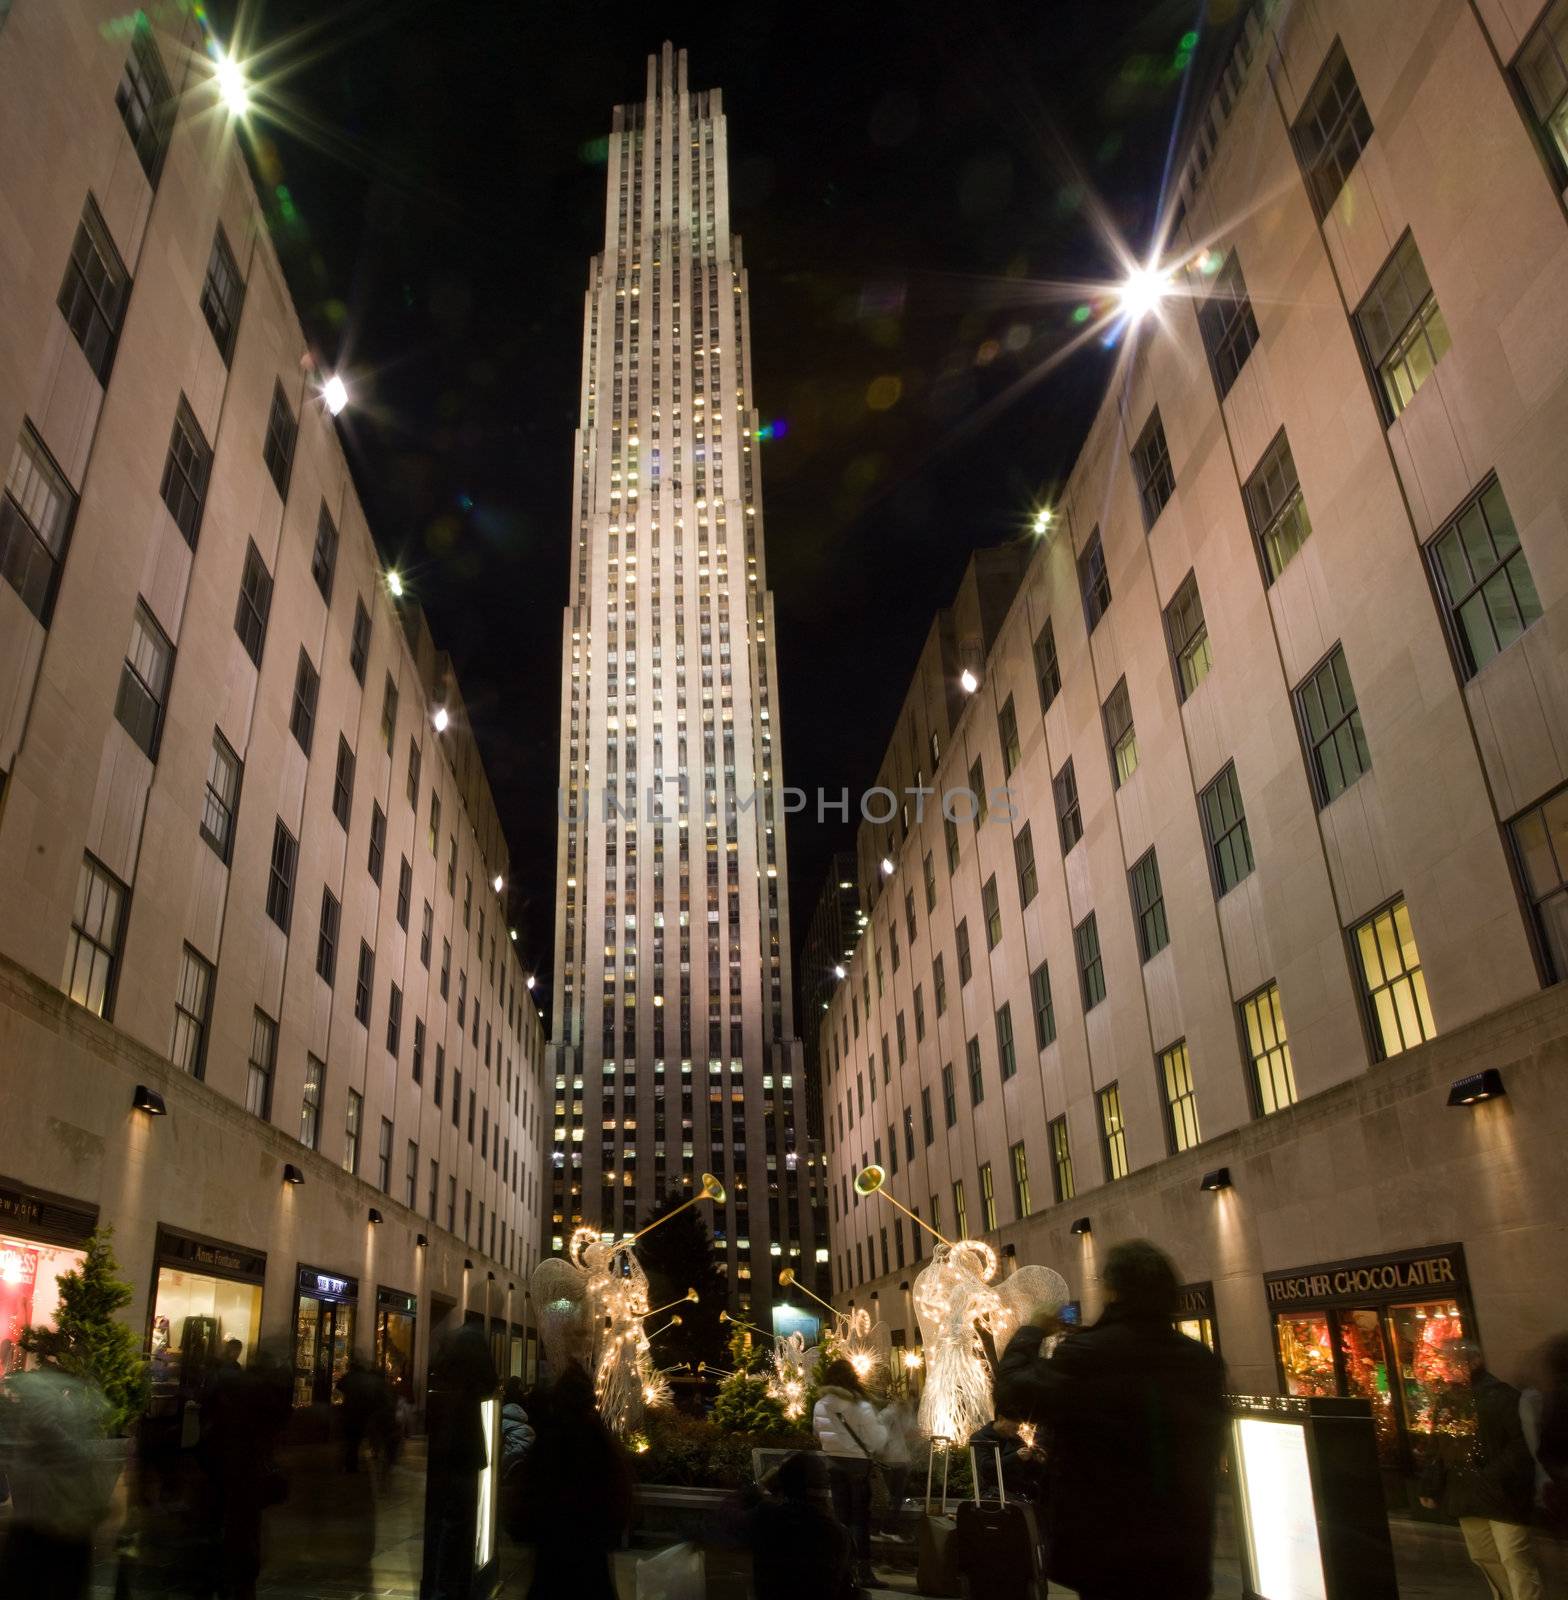 Rockefeller Center at Christmas time by phakimata